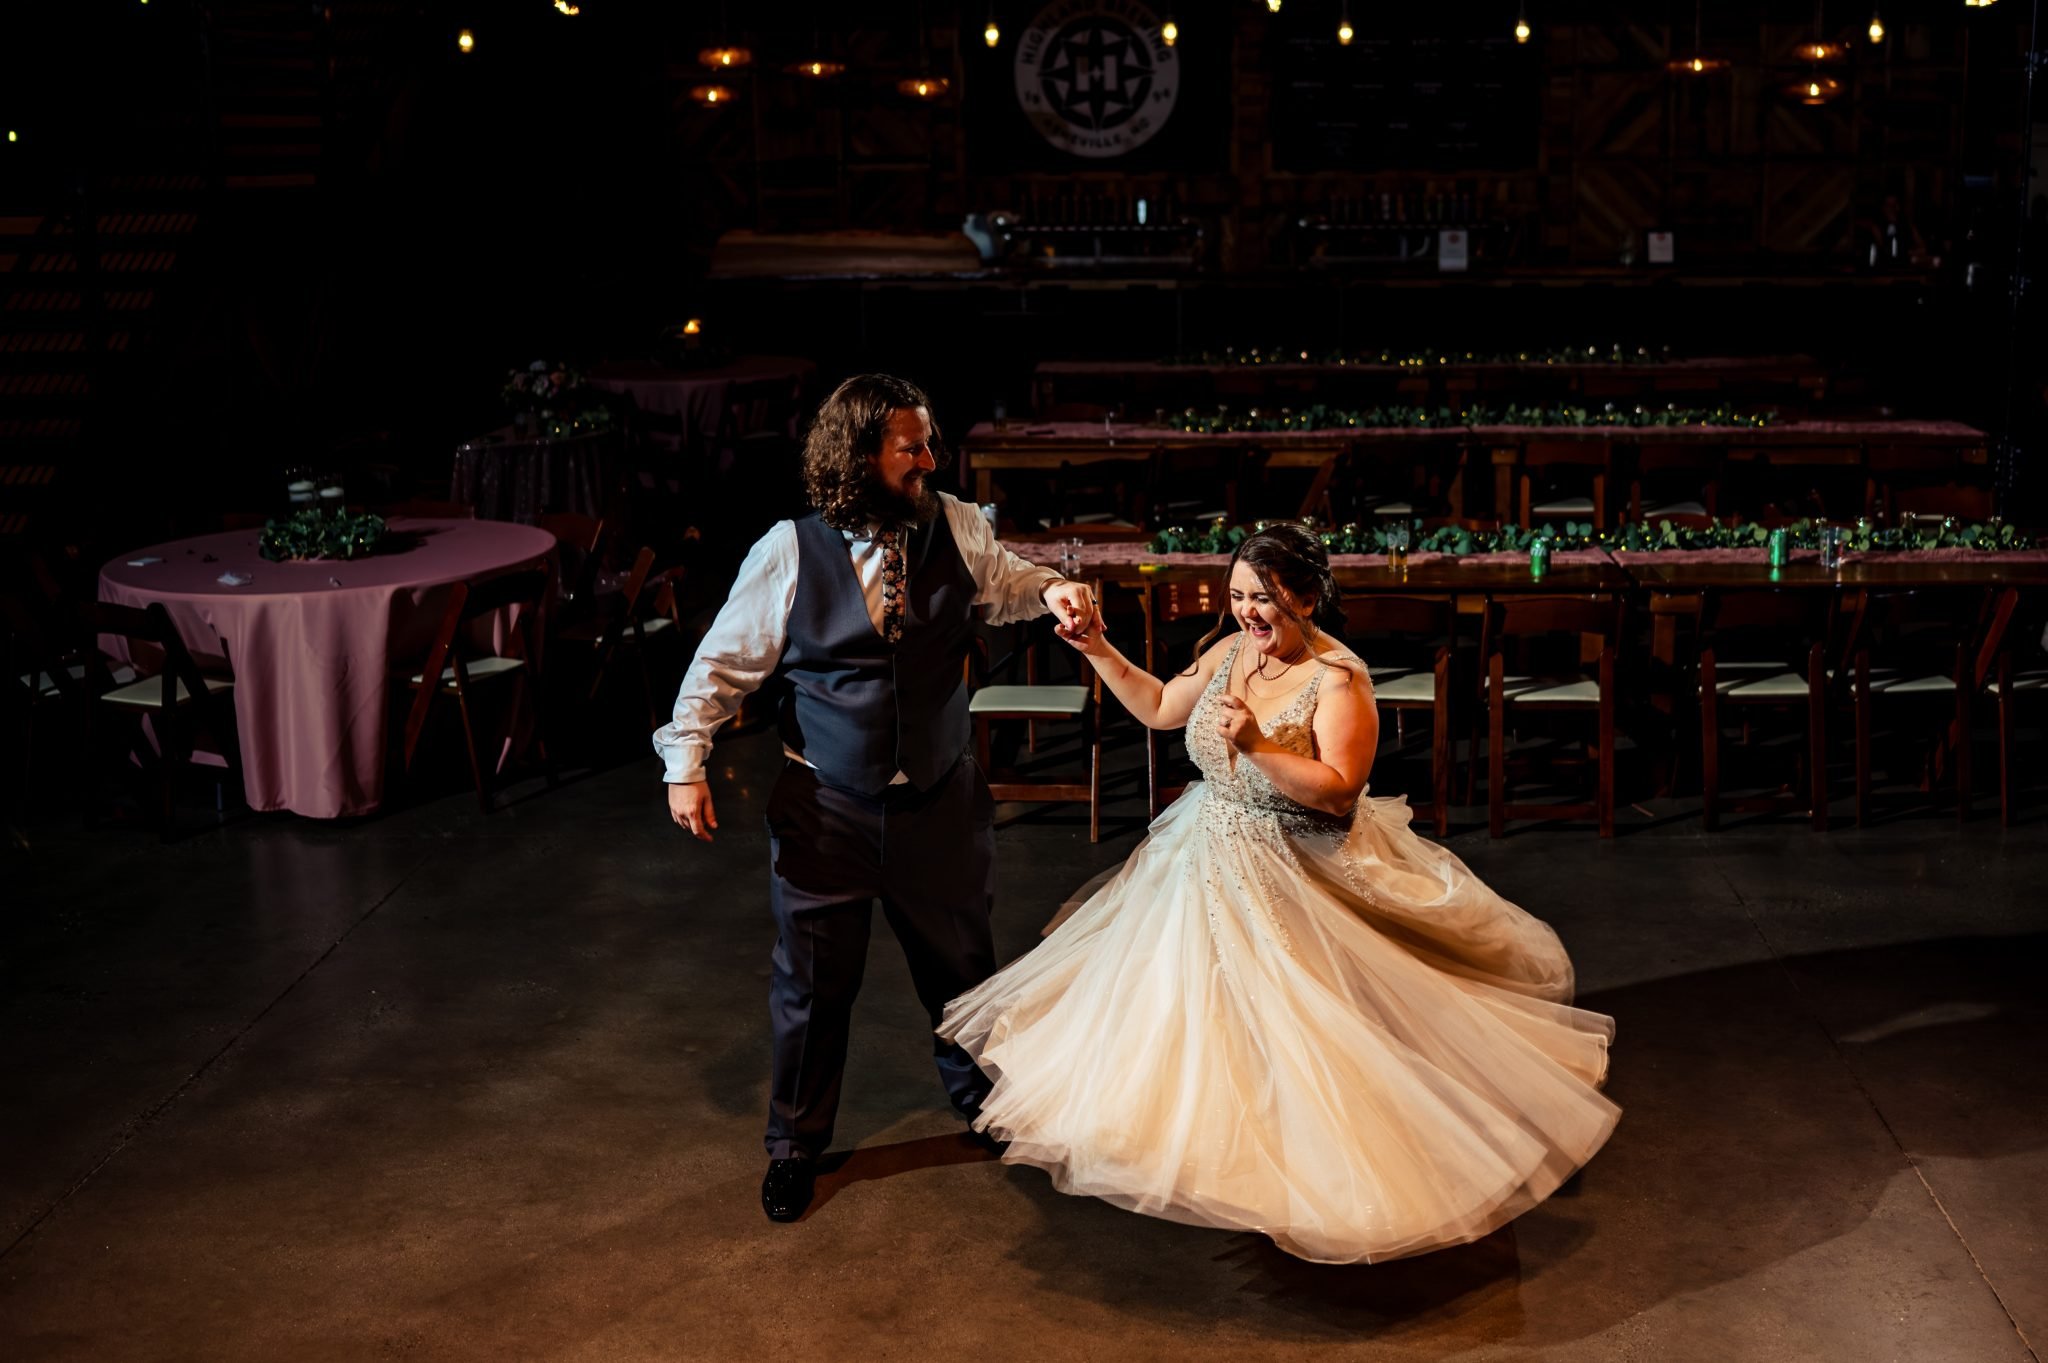 A bride and groom dancing at a highland brewing wedding in a barn.